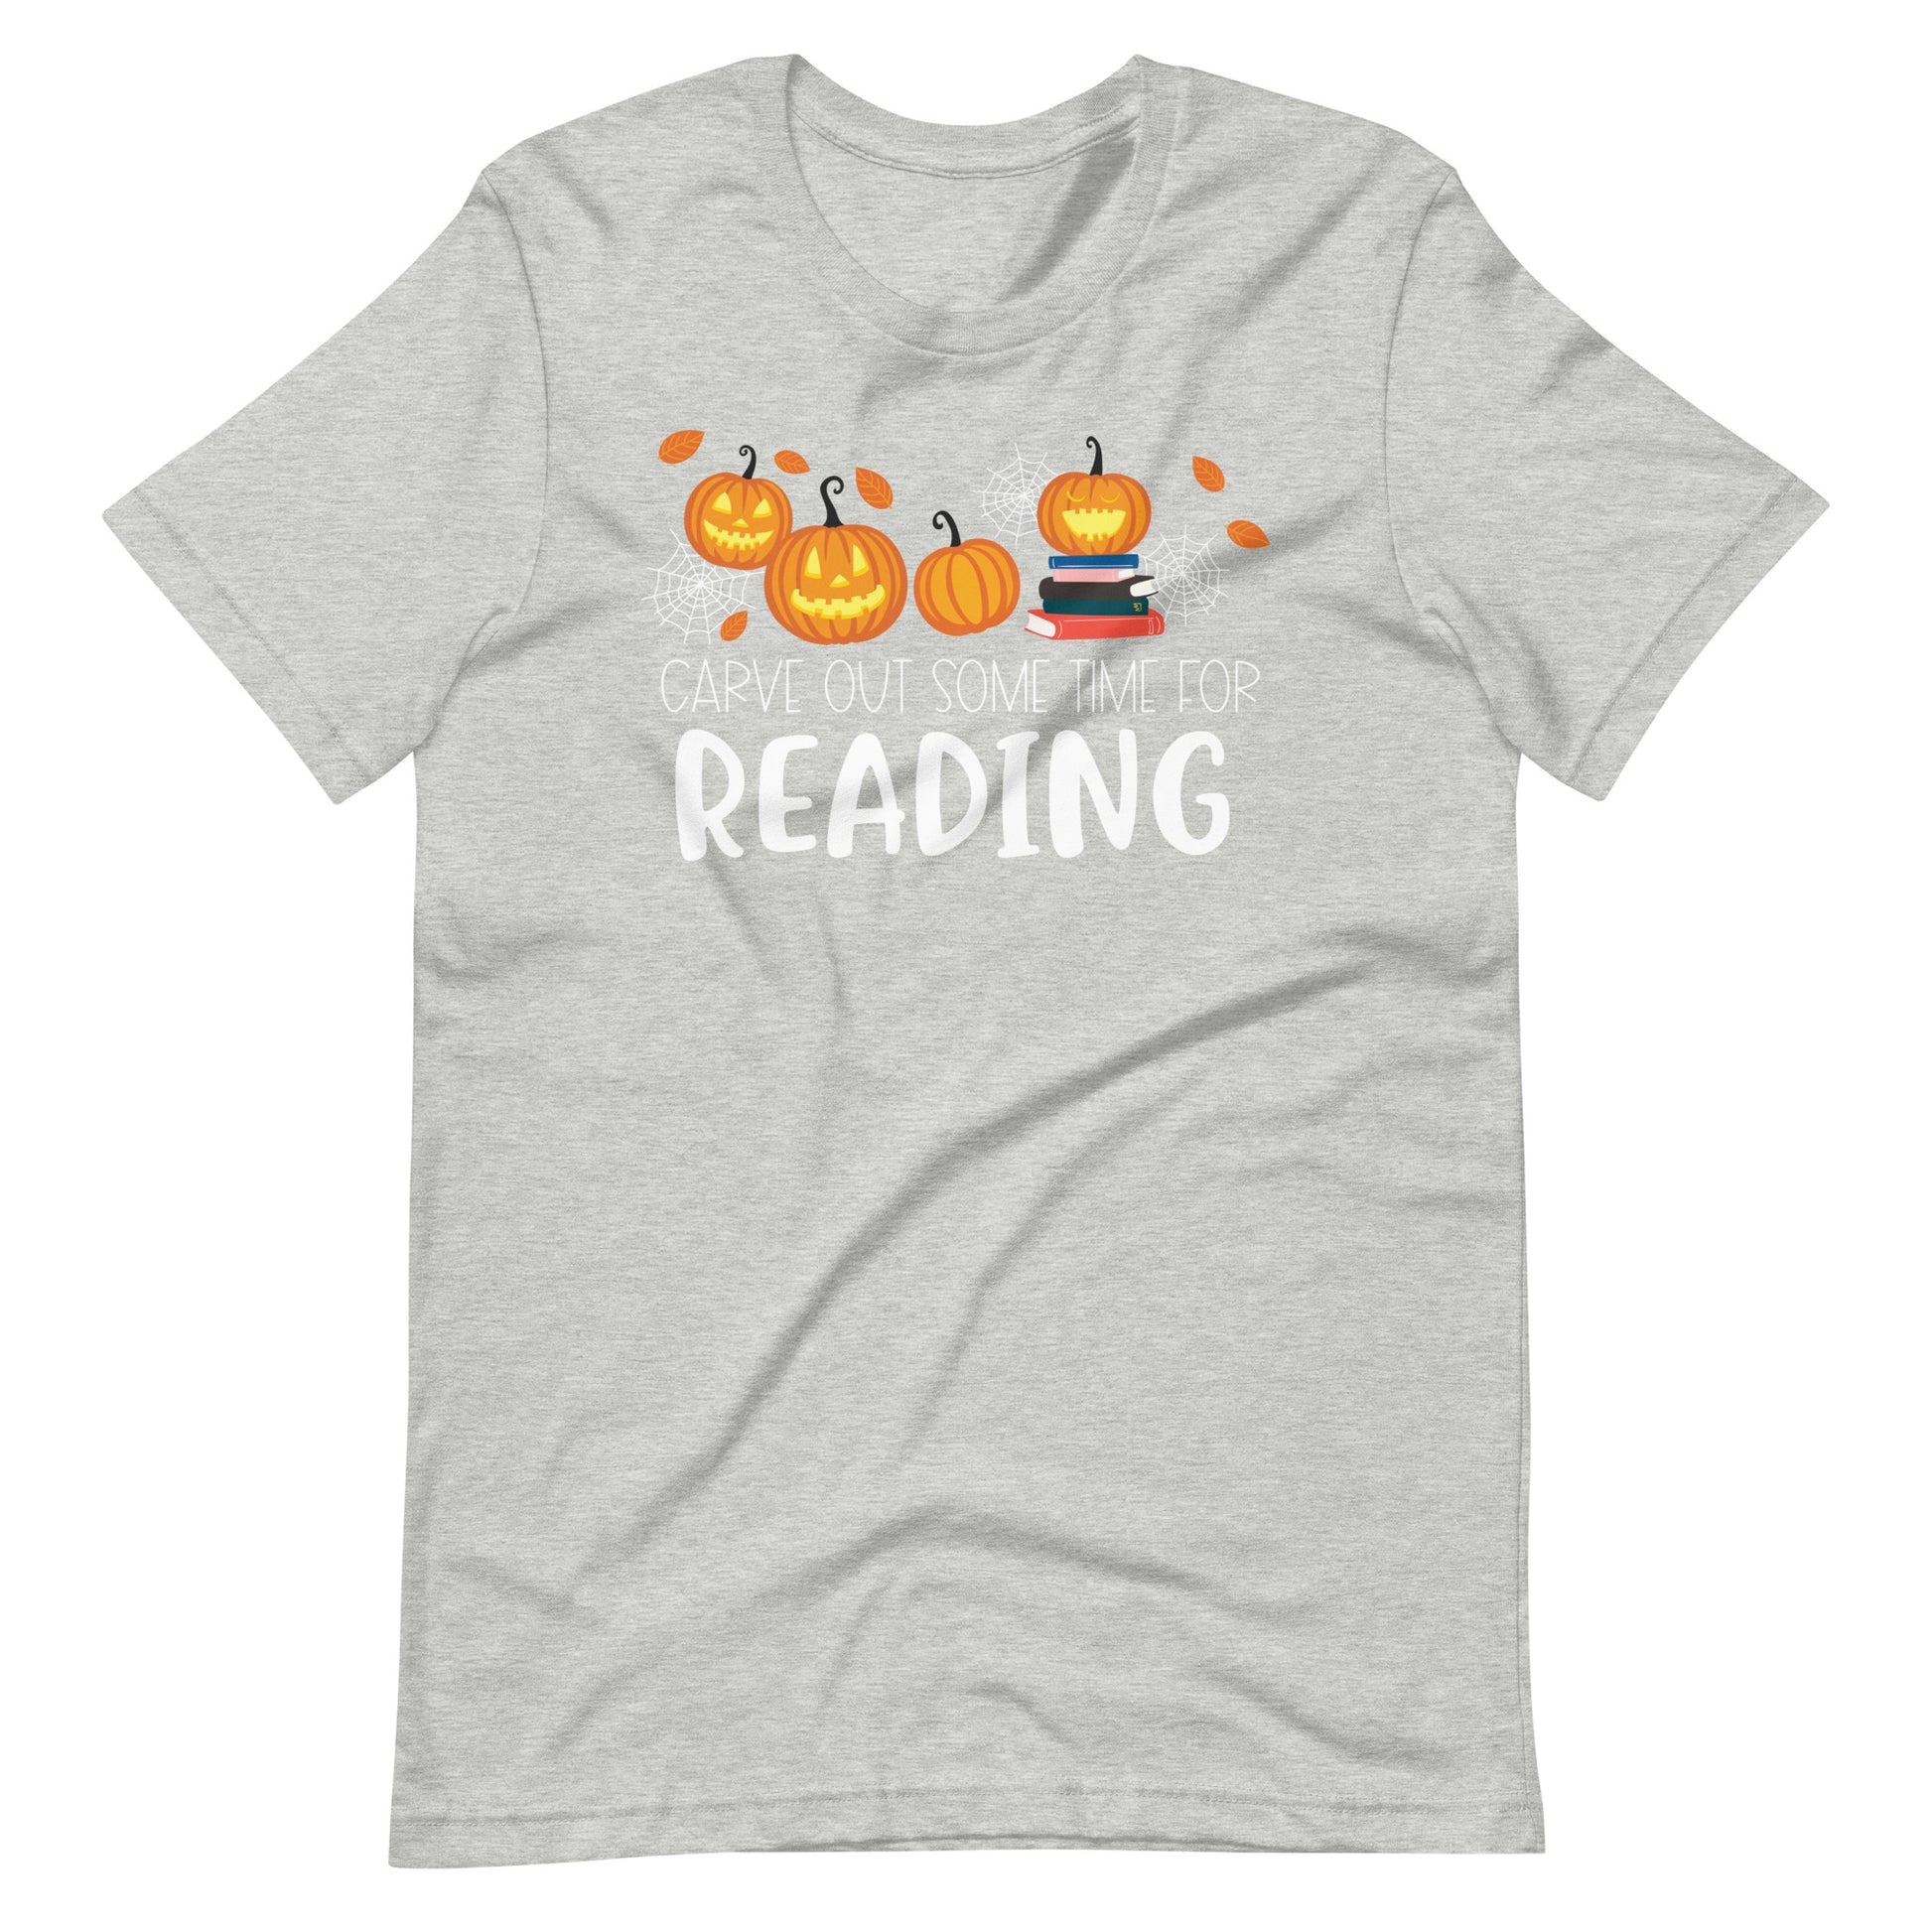 Carve Out Some Time - Reading Librarian Halloween Shirt - Light Grey